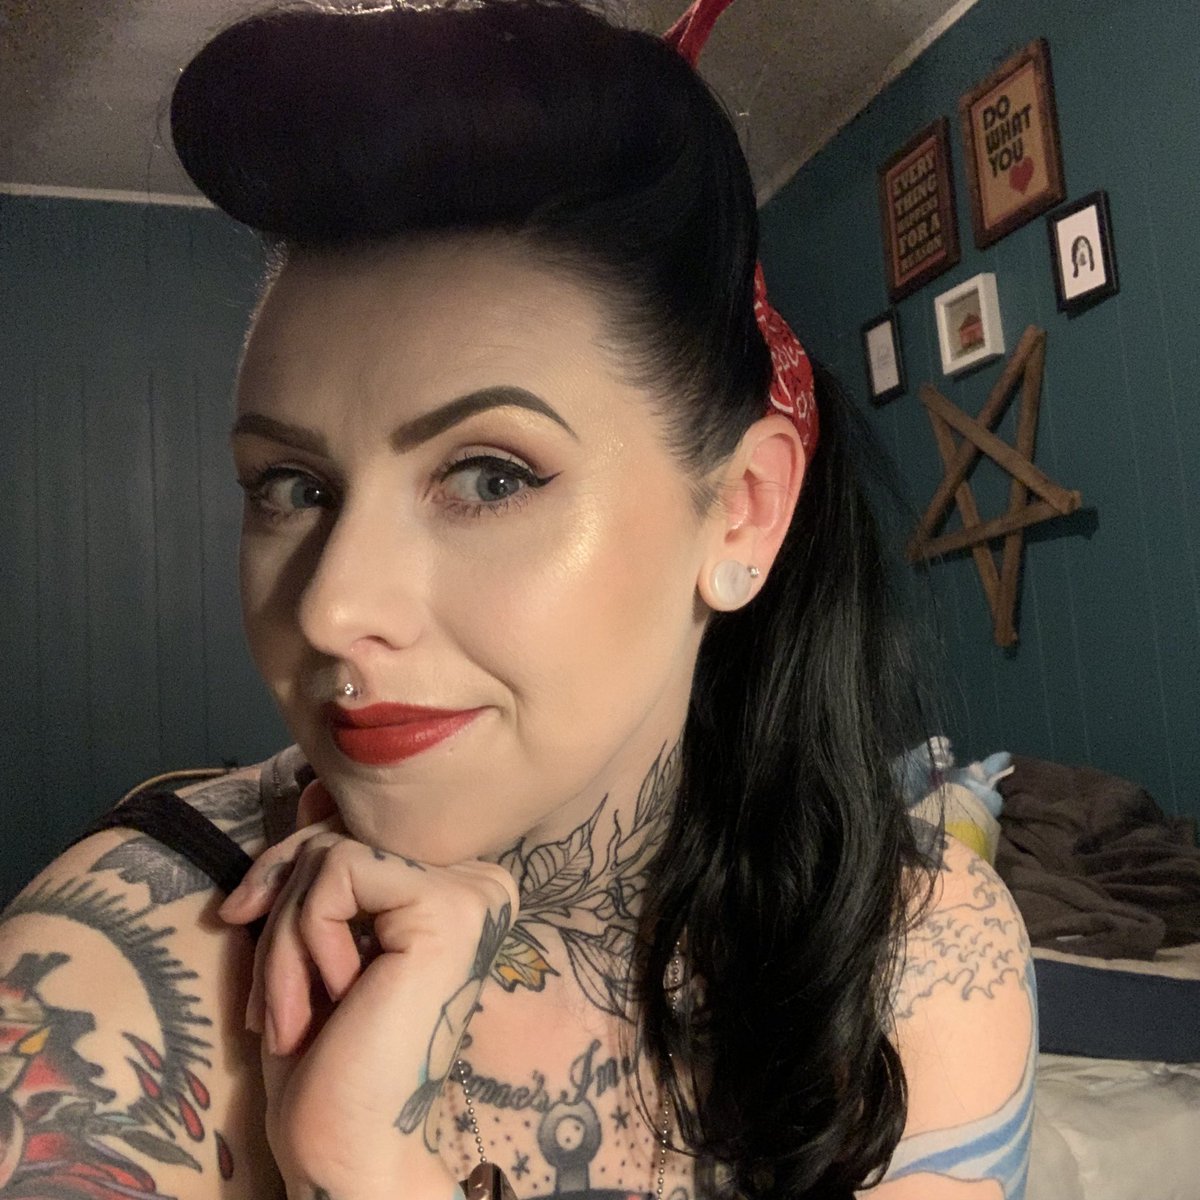 After much blood, sweat and tears, we arrived at this hairstyle. I need a lot of practice but it’s a start. #retrohair #vintagehair #vintagestyle #pinup